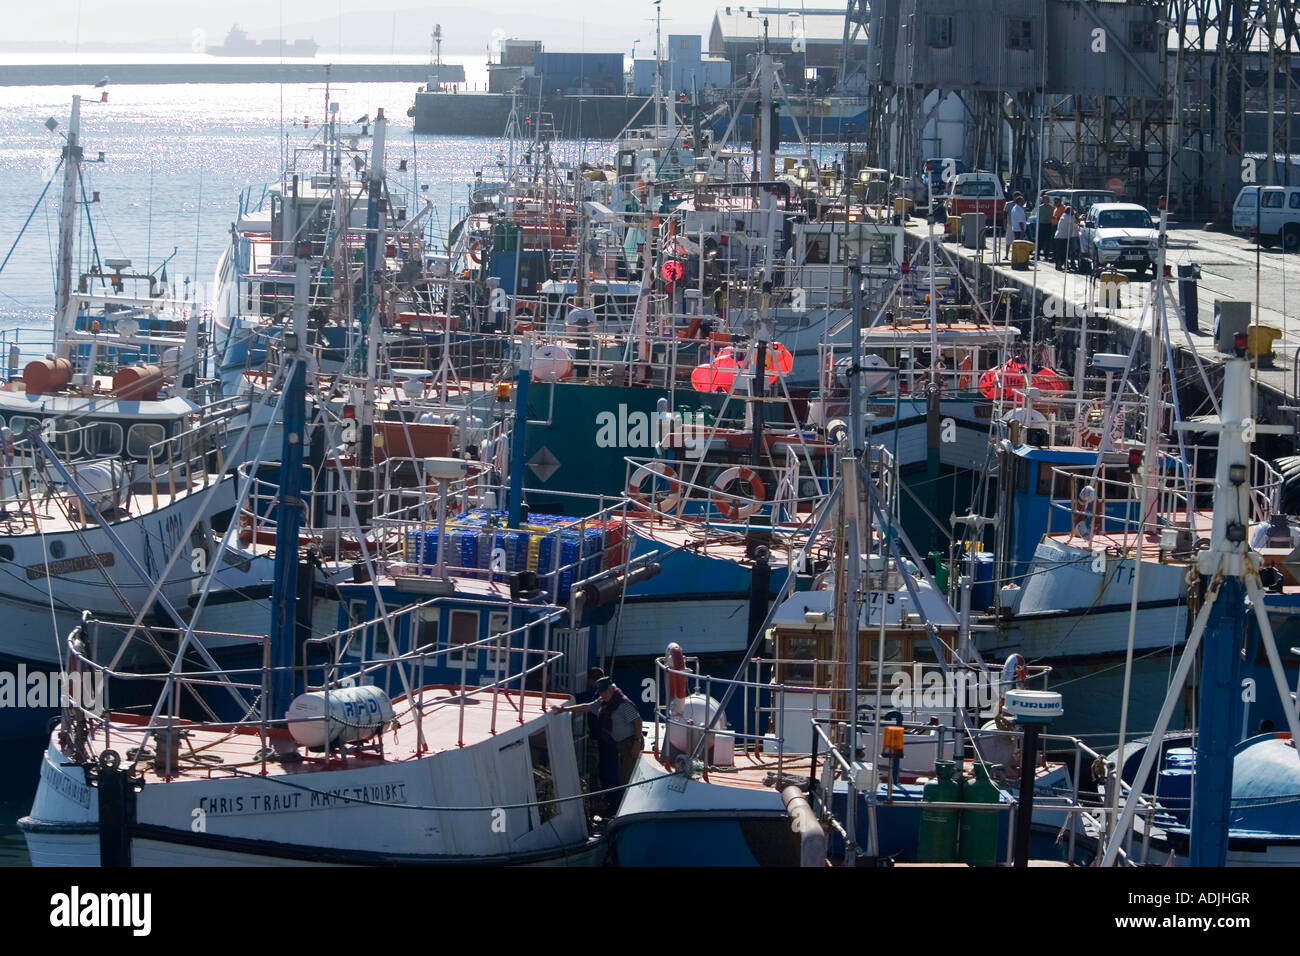 Tuna fishing boats at dock at the V&A waterfront, Cape Town, South Africa  Stock Photo - Alamy